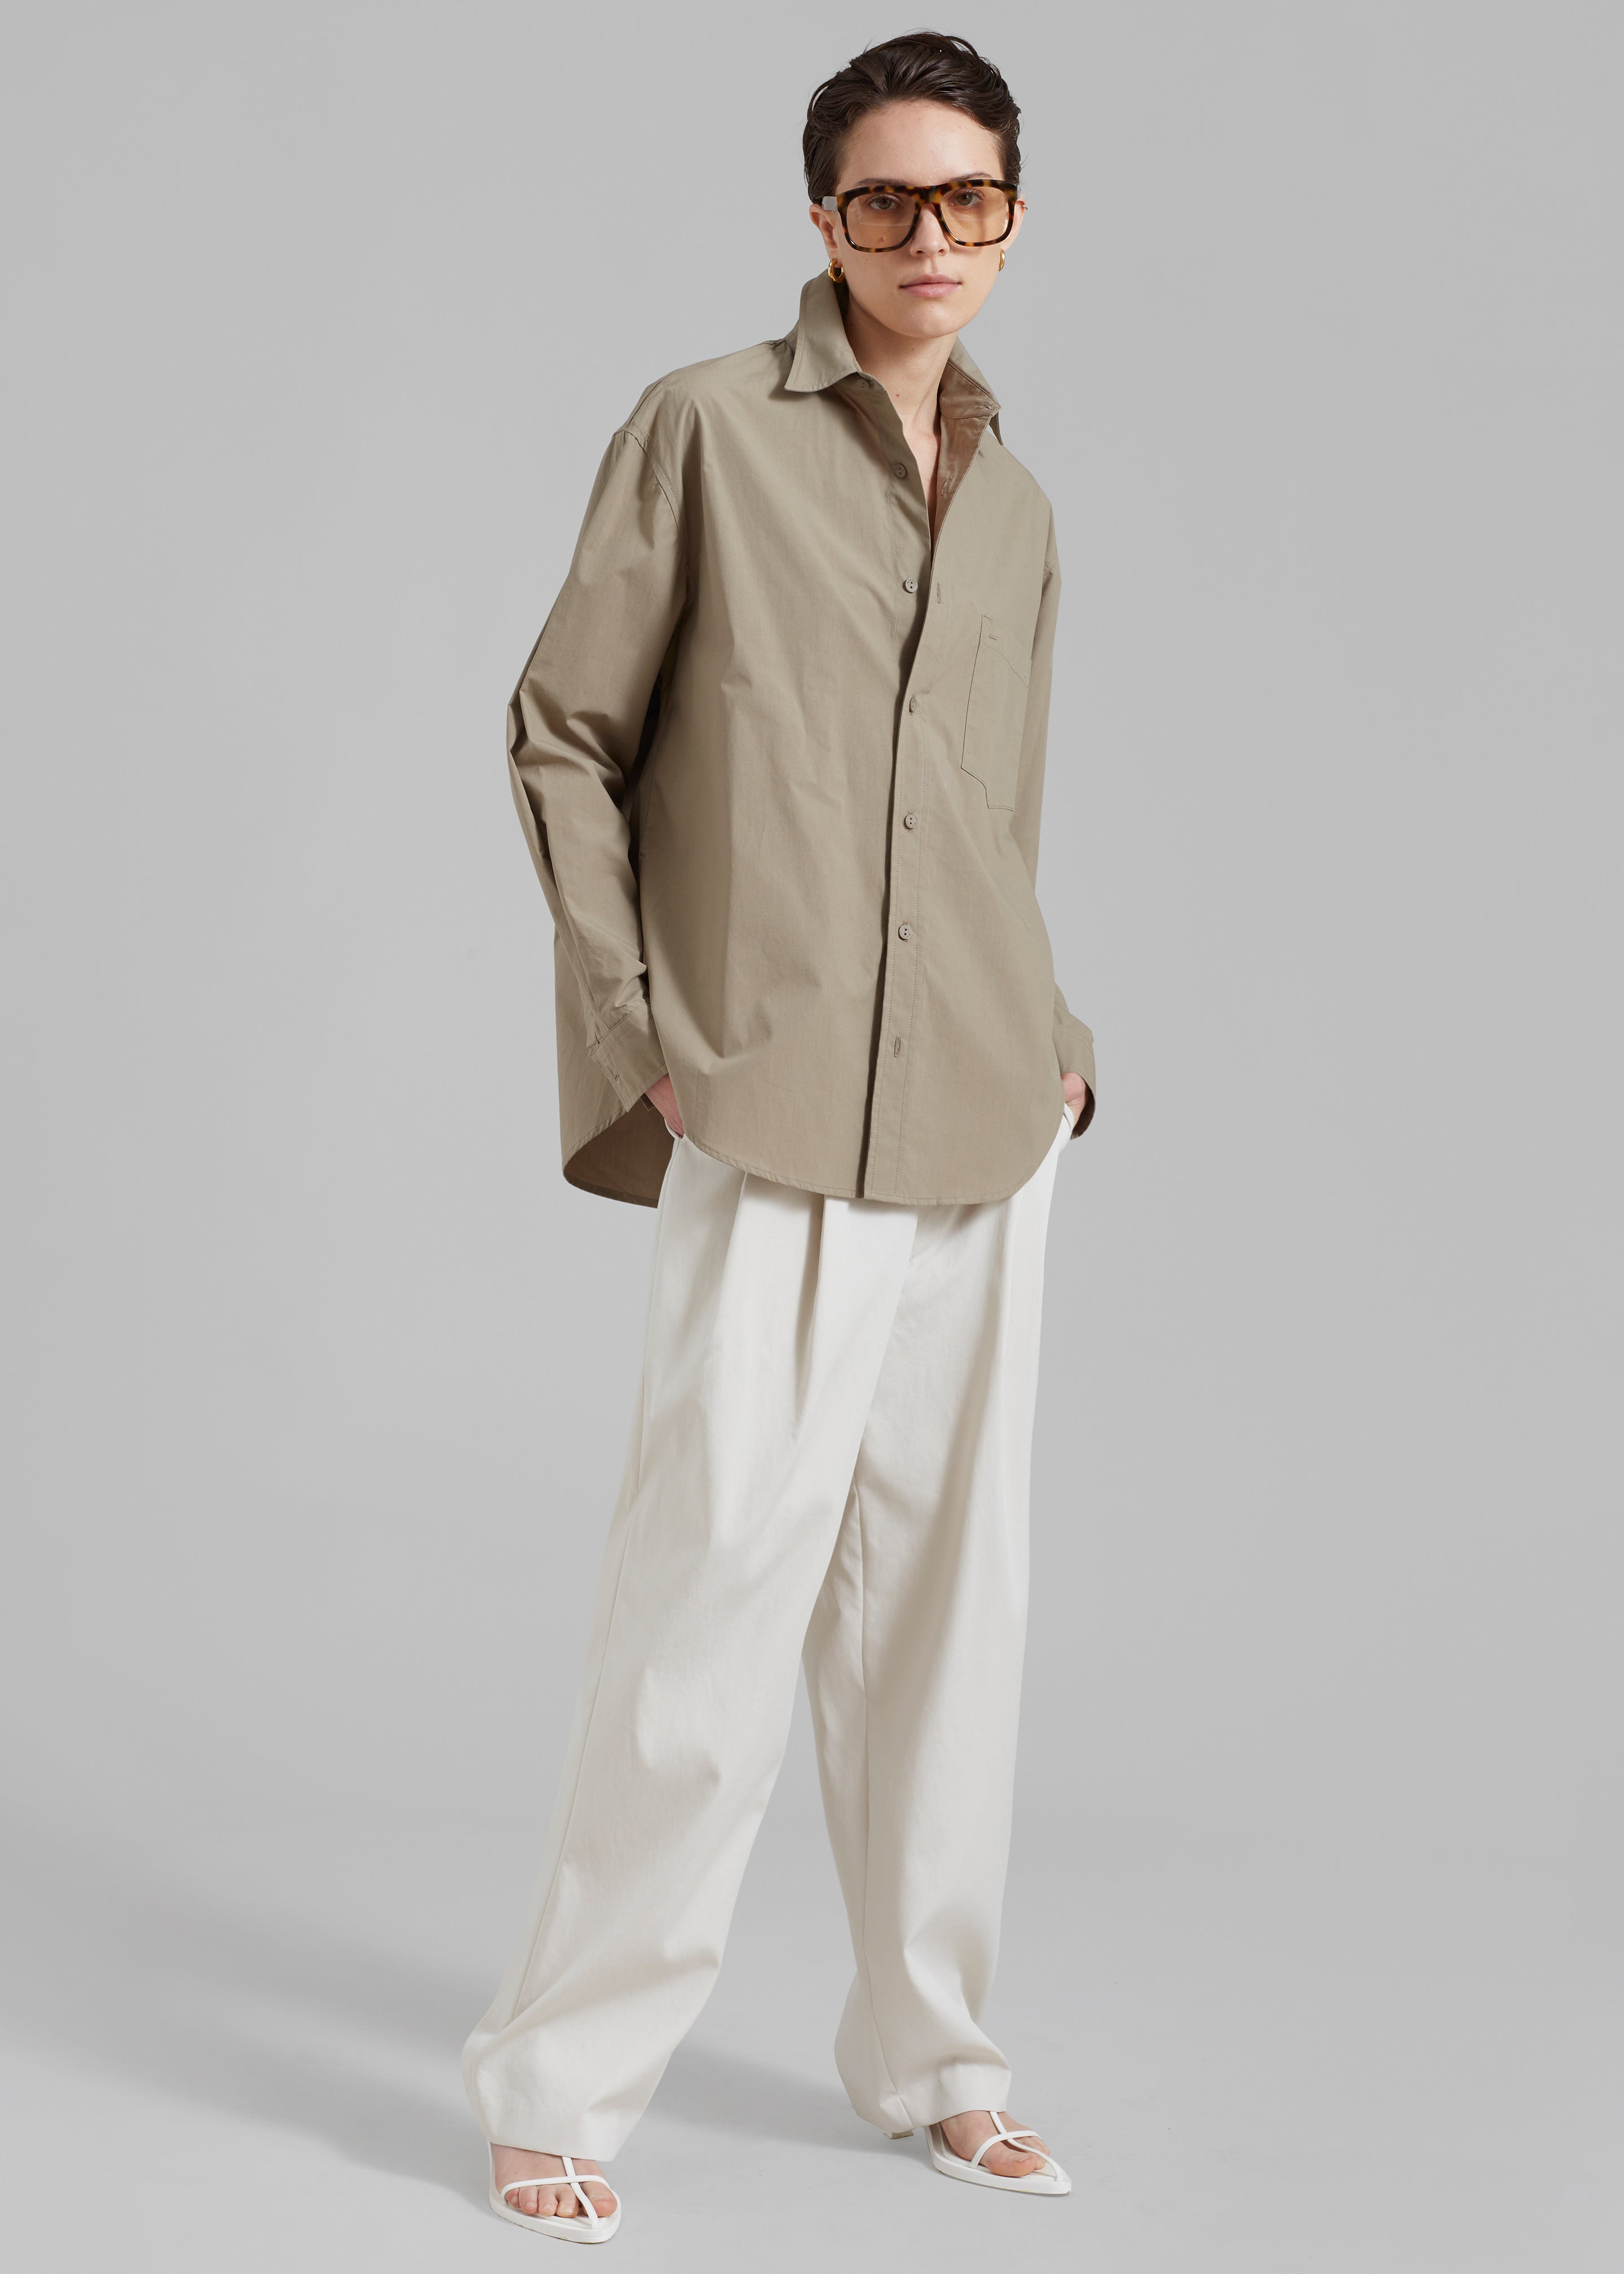 Matteau Relaxed Shirt - Taupe - 4